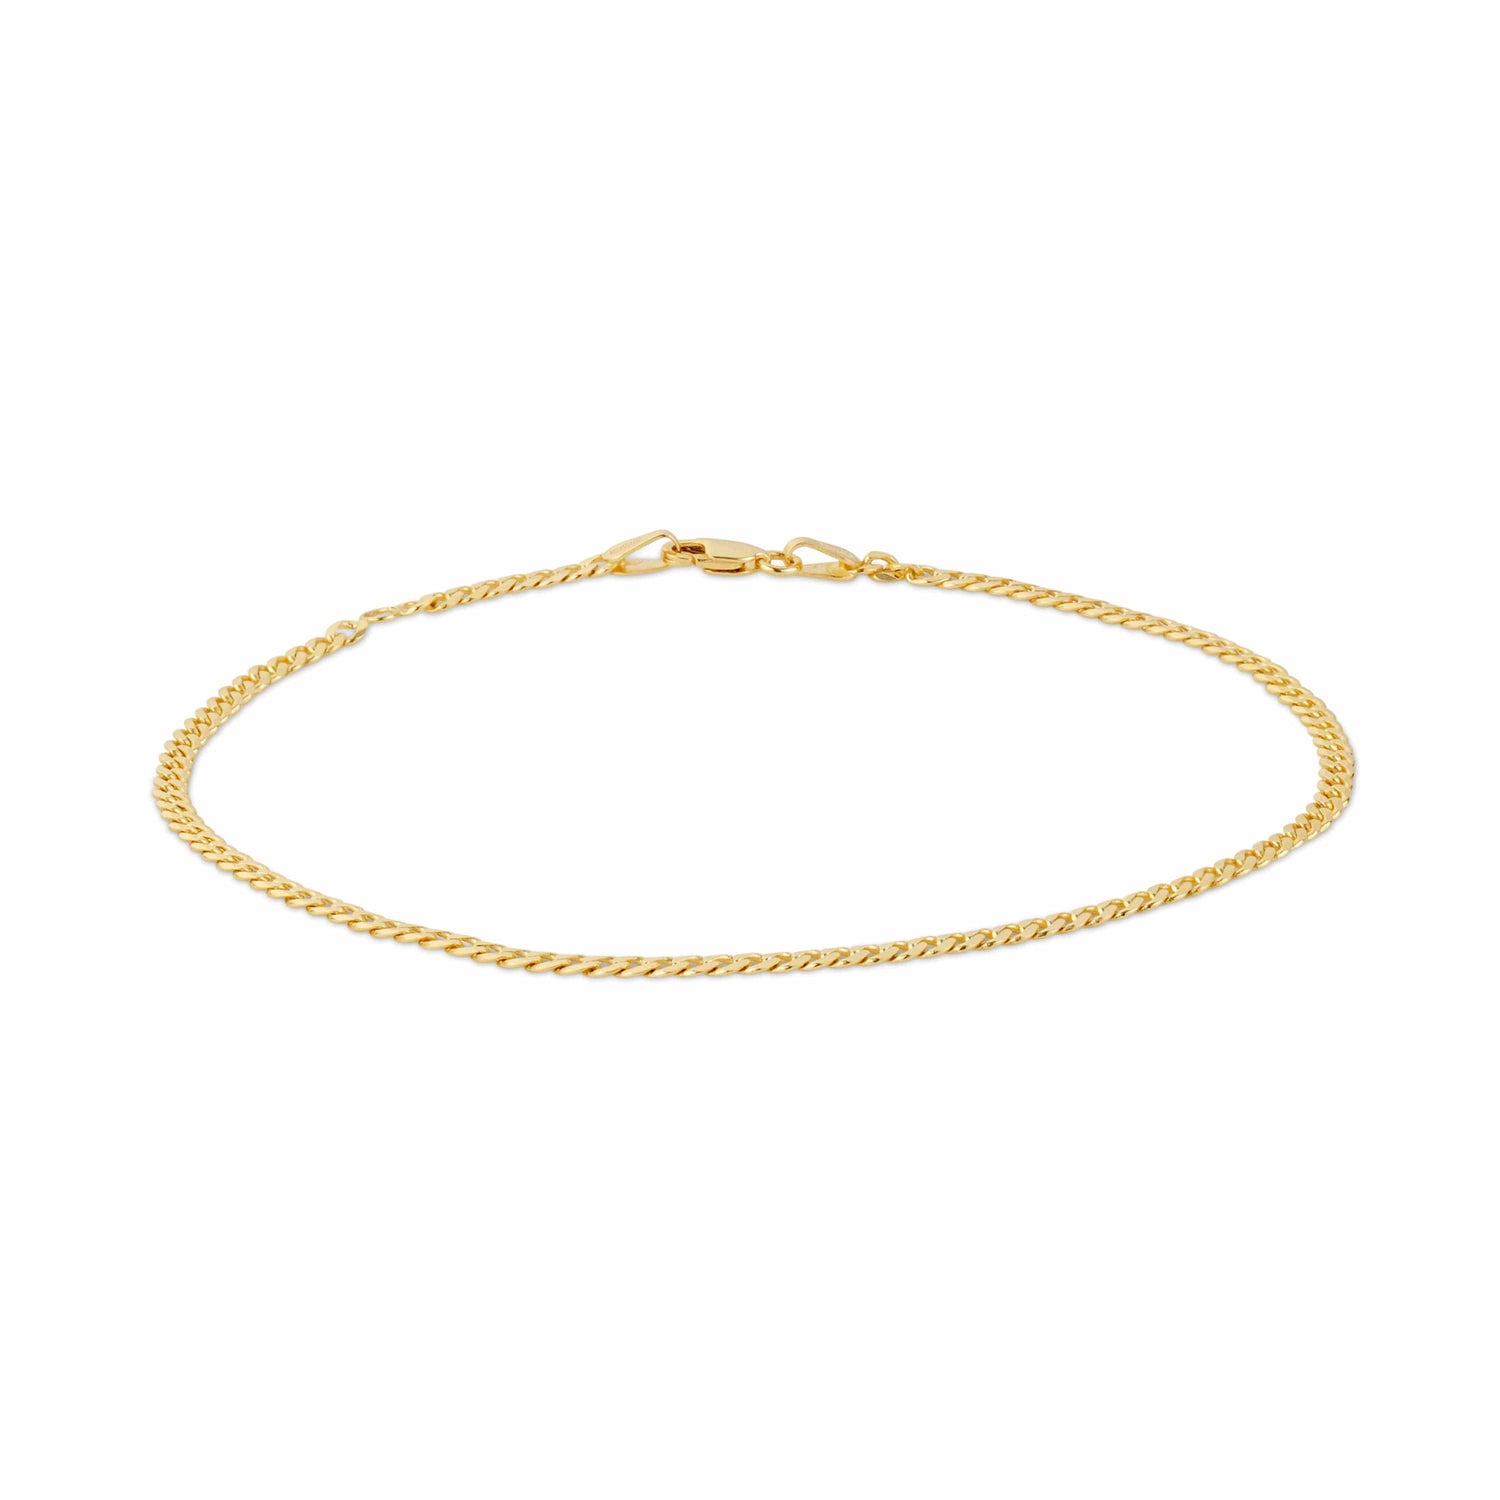 Close-up of a thin gold anklet chain with a clasp.